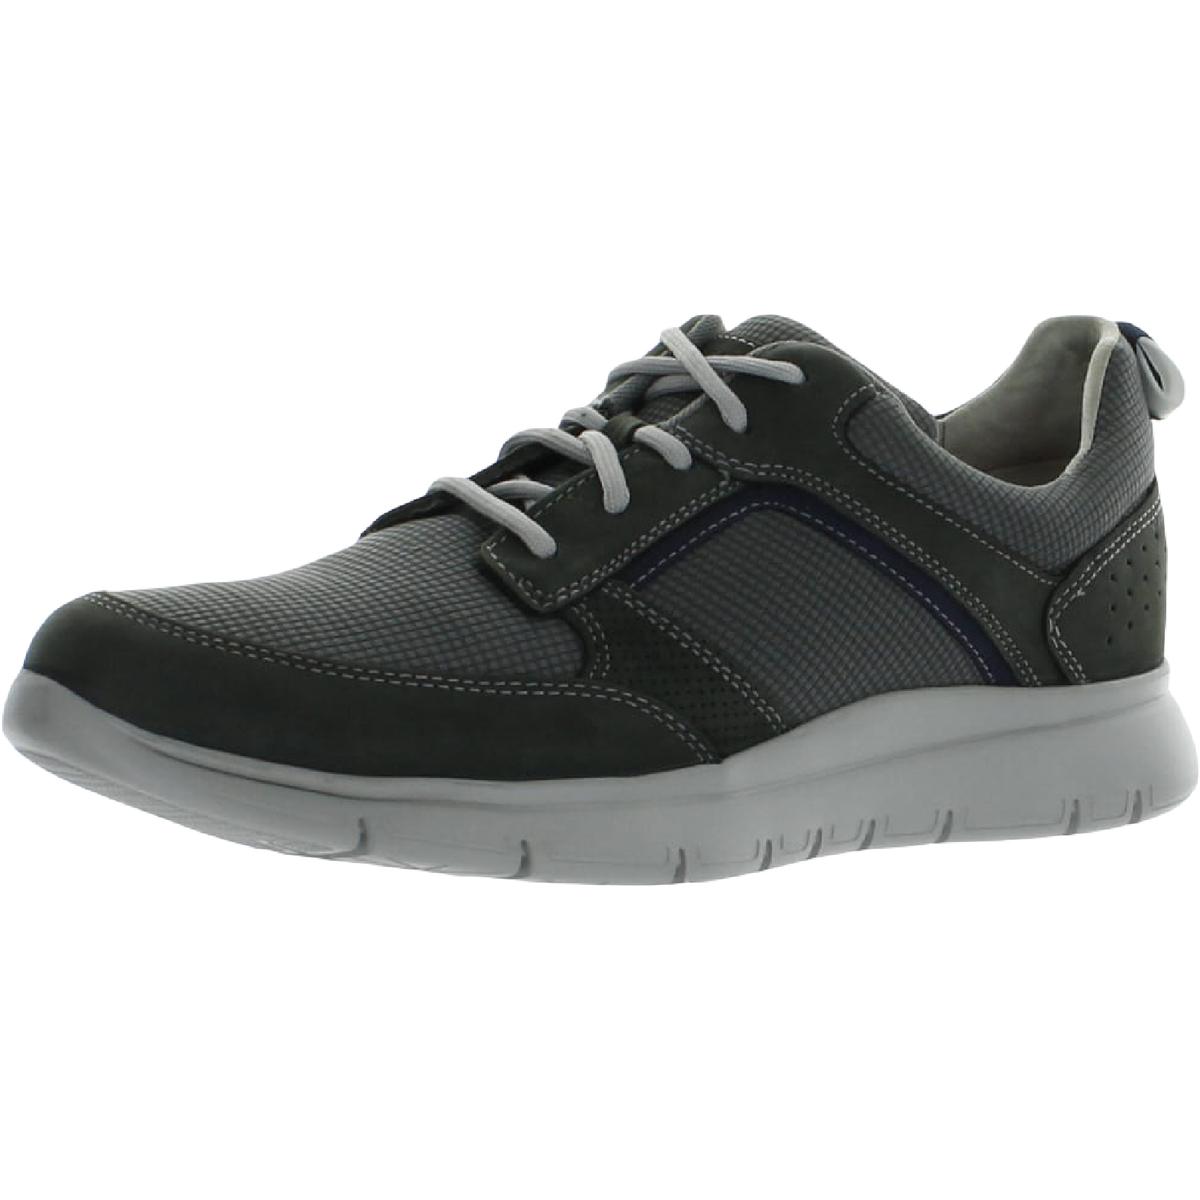 Rockport Pritmetime Casual MDG Mens Leather Lace Up Athletic and Training Shoes